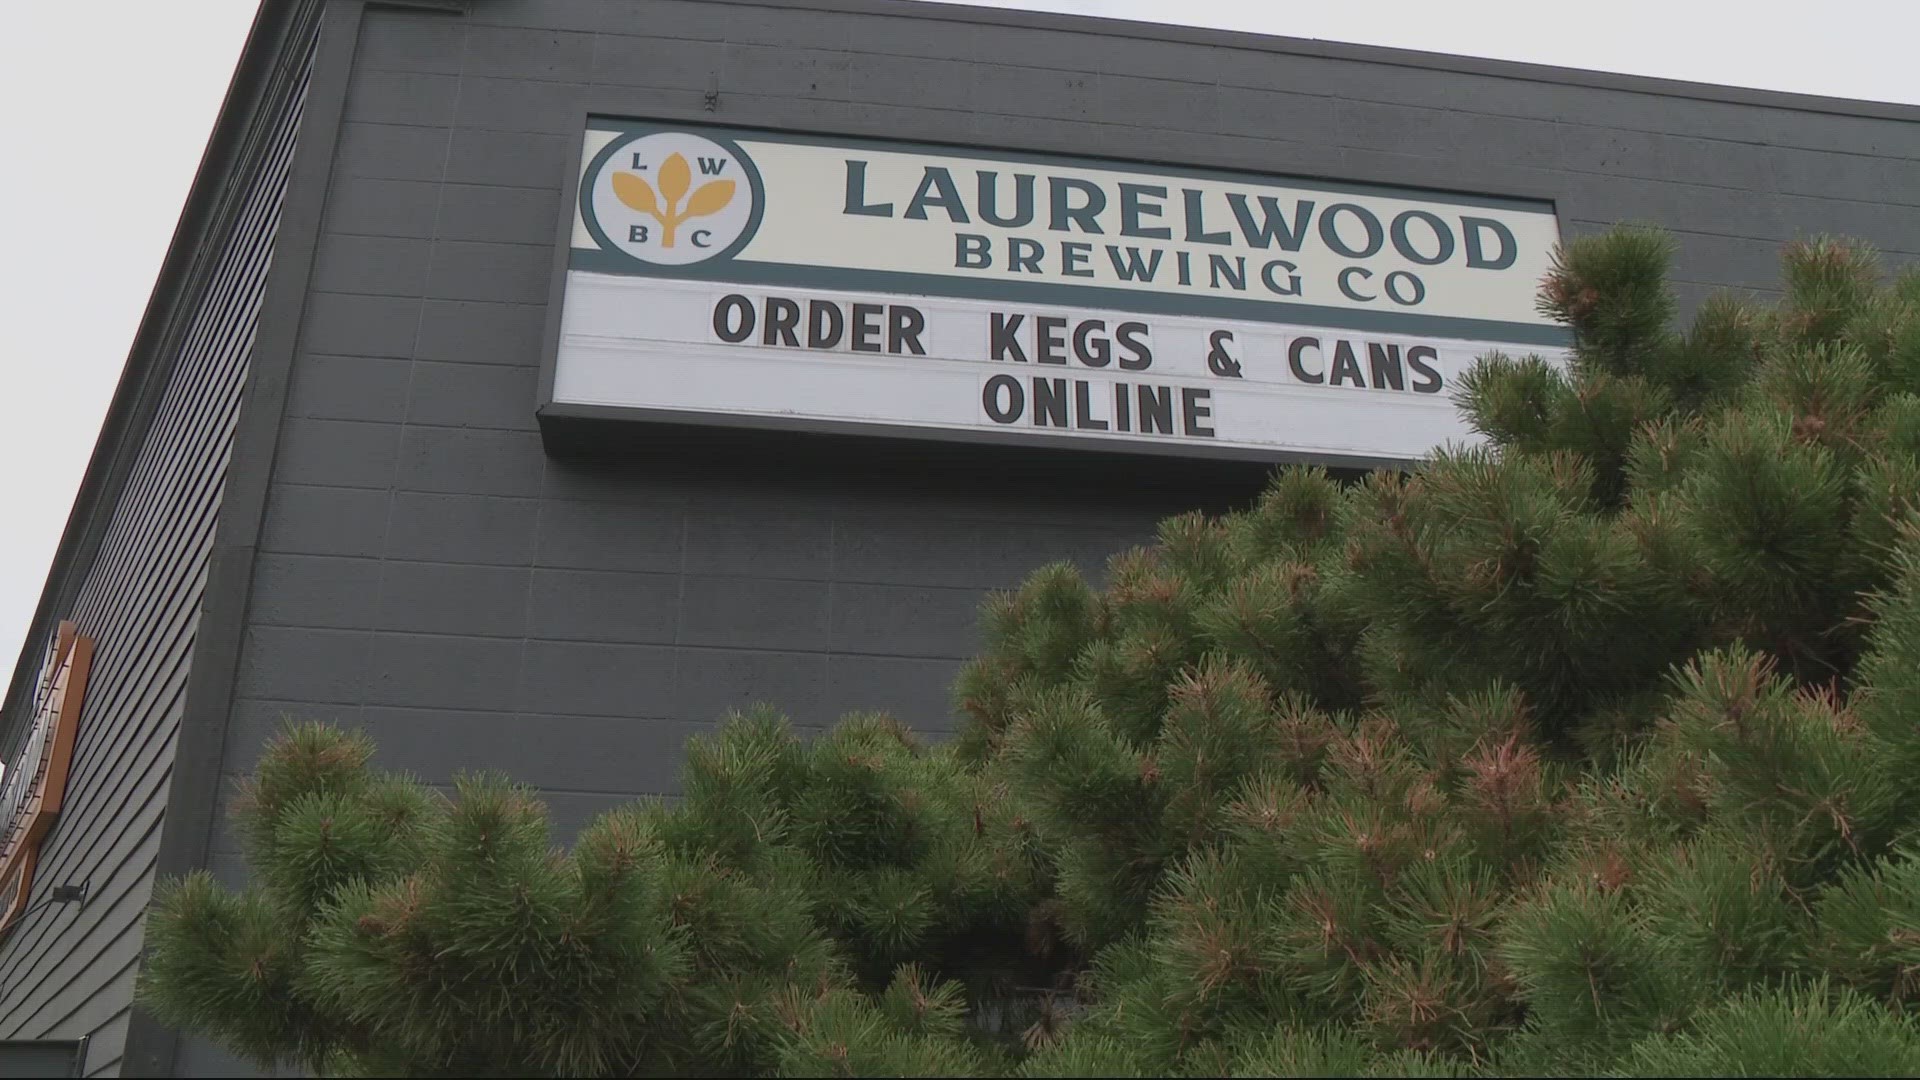 One of Portland's long-time brewing companies has shut down its only remaining pub. Laurelwood Brewing Co.'s pub on Northeast Sandy Boulevard closed this week.